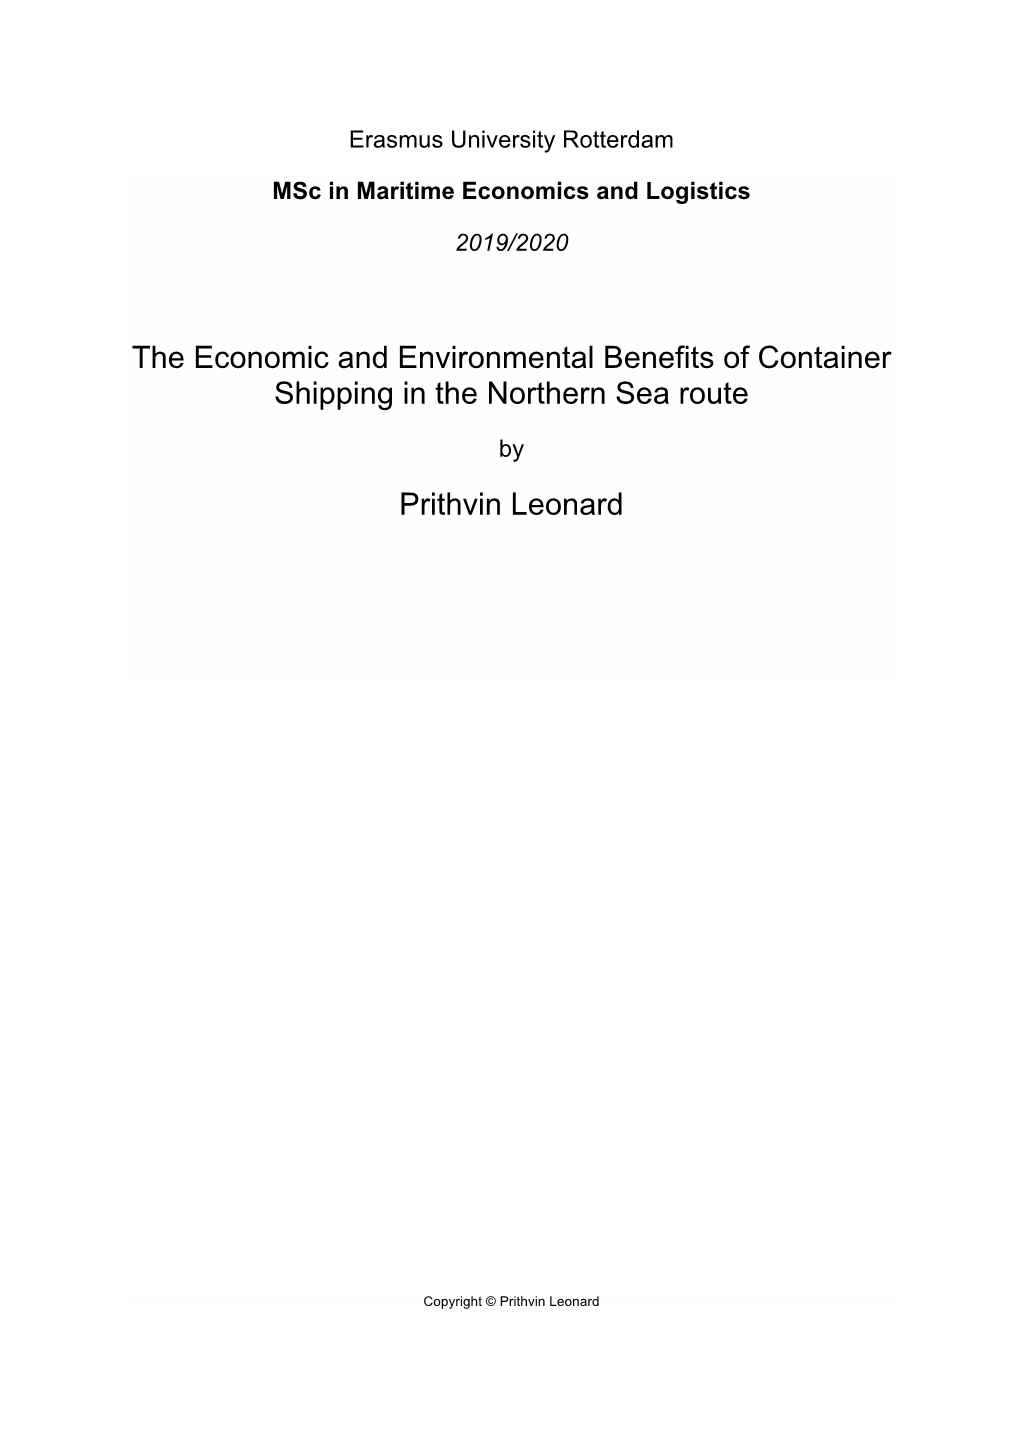 The Economic and Environmental Benefits of Container Shipping in the Northern Sea Route